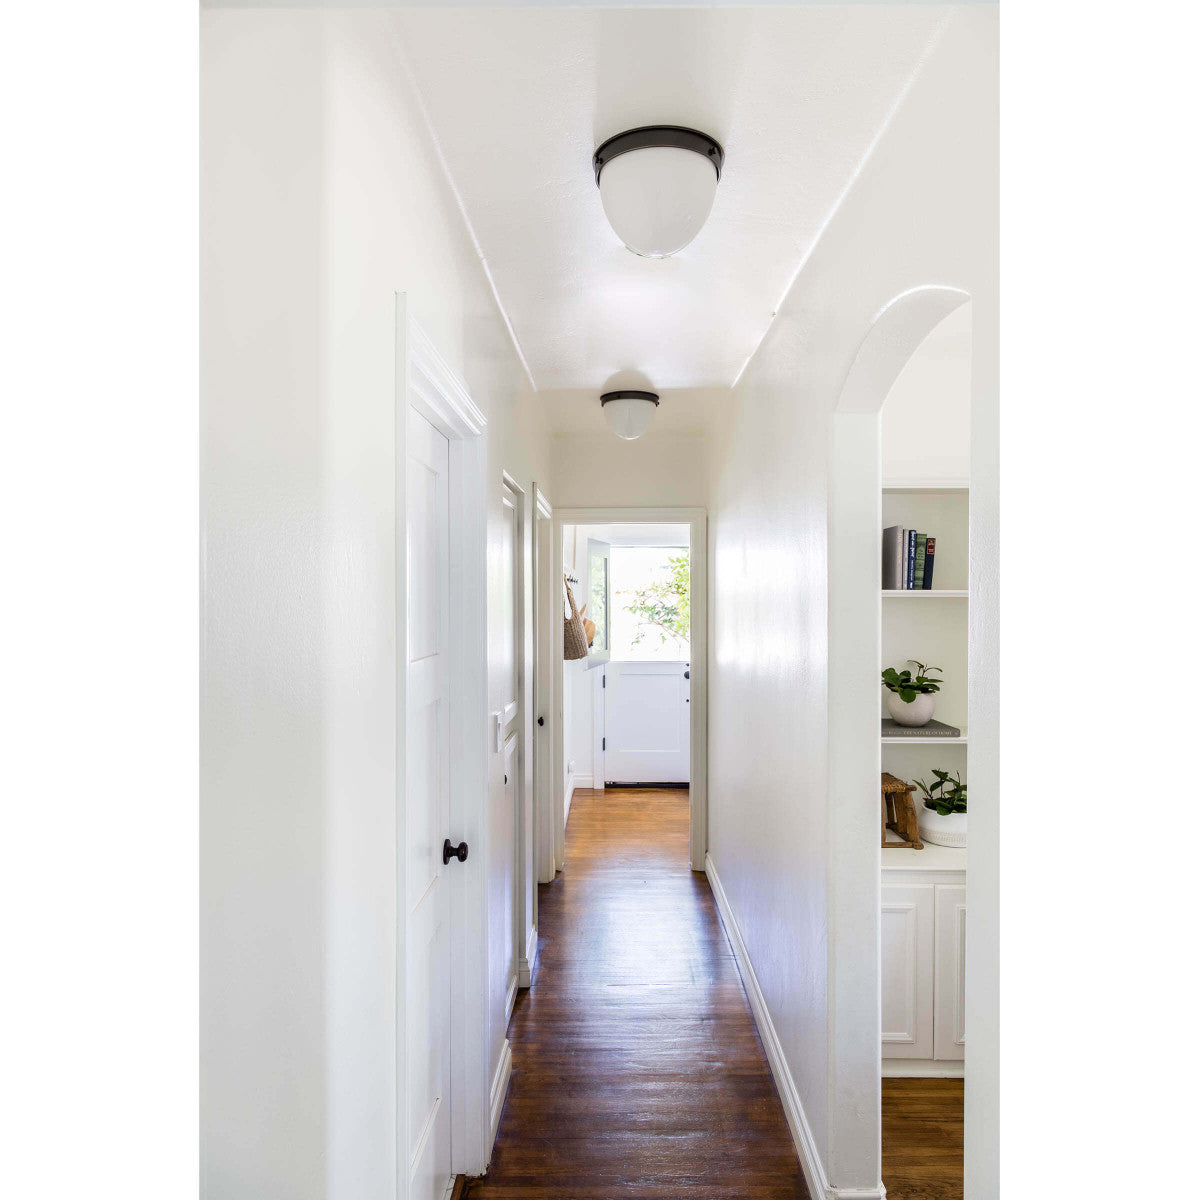 We love the warm and glowing look the white opal glass gives when illuminated in this Bay Harbor Oil Rubbed Bronze Flush Mount. This would look stunning in areas with lower ceilings or in hallways.   Size: 11"w x 11"d x 7.5"h Material: Steel